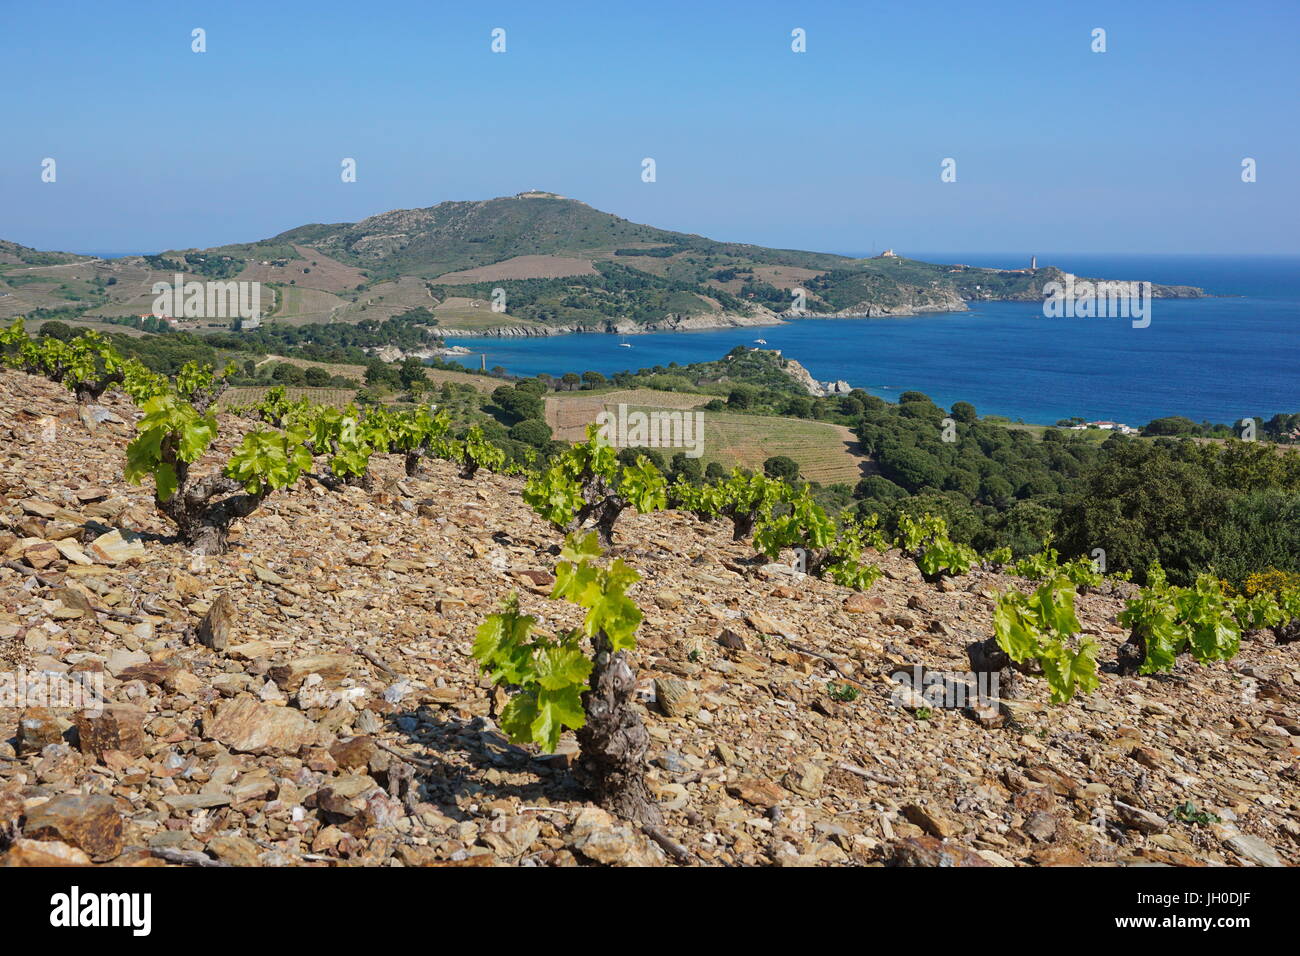 Coastal landscape field of vineyard and the bay of Paulilles, Mediterranean sea, south of France, Pyrenees Orientales, Roussillon, Cote Vermeille Stock Photo